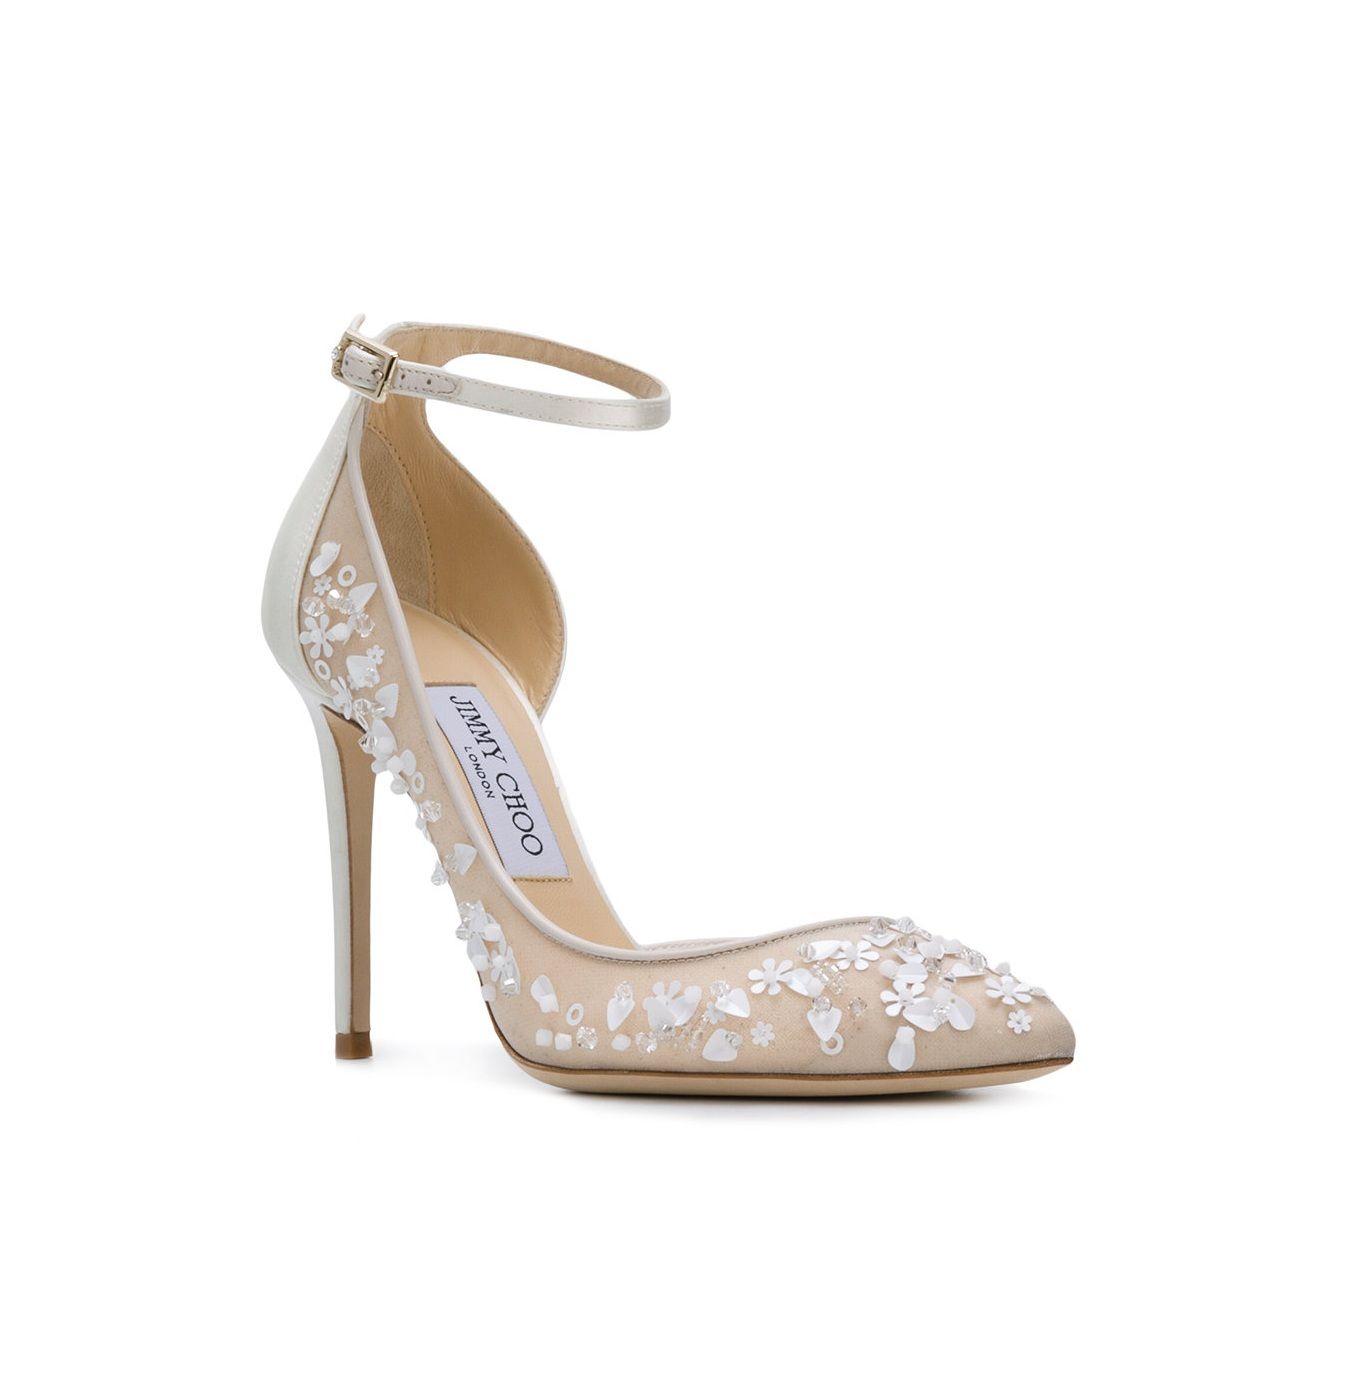 Jimmy Choo's Lucy 100 embellished pumps